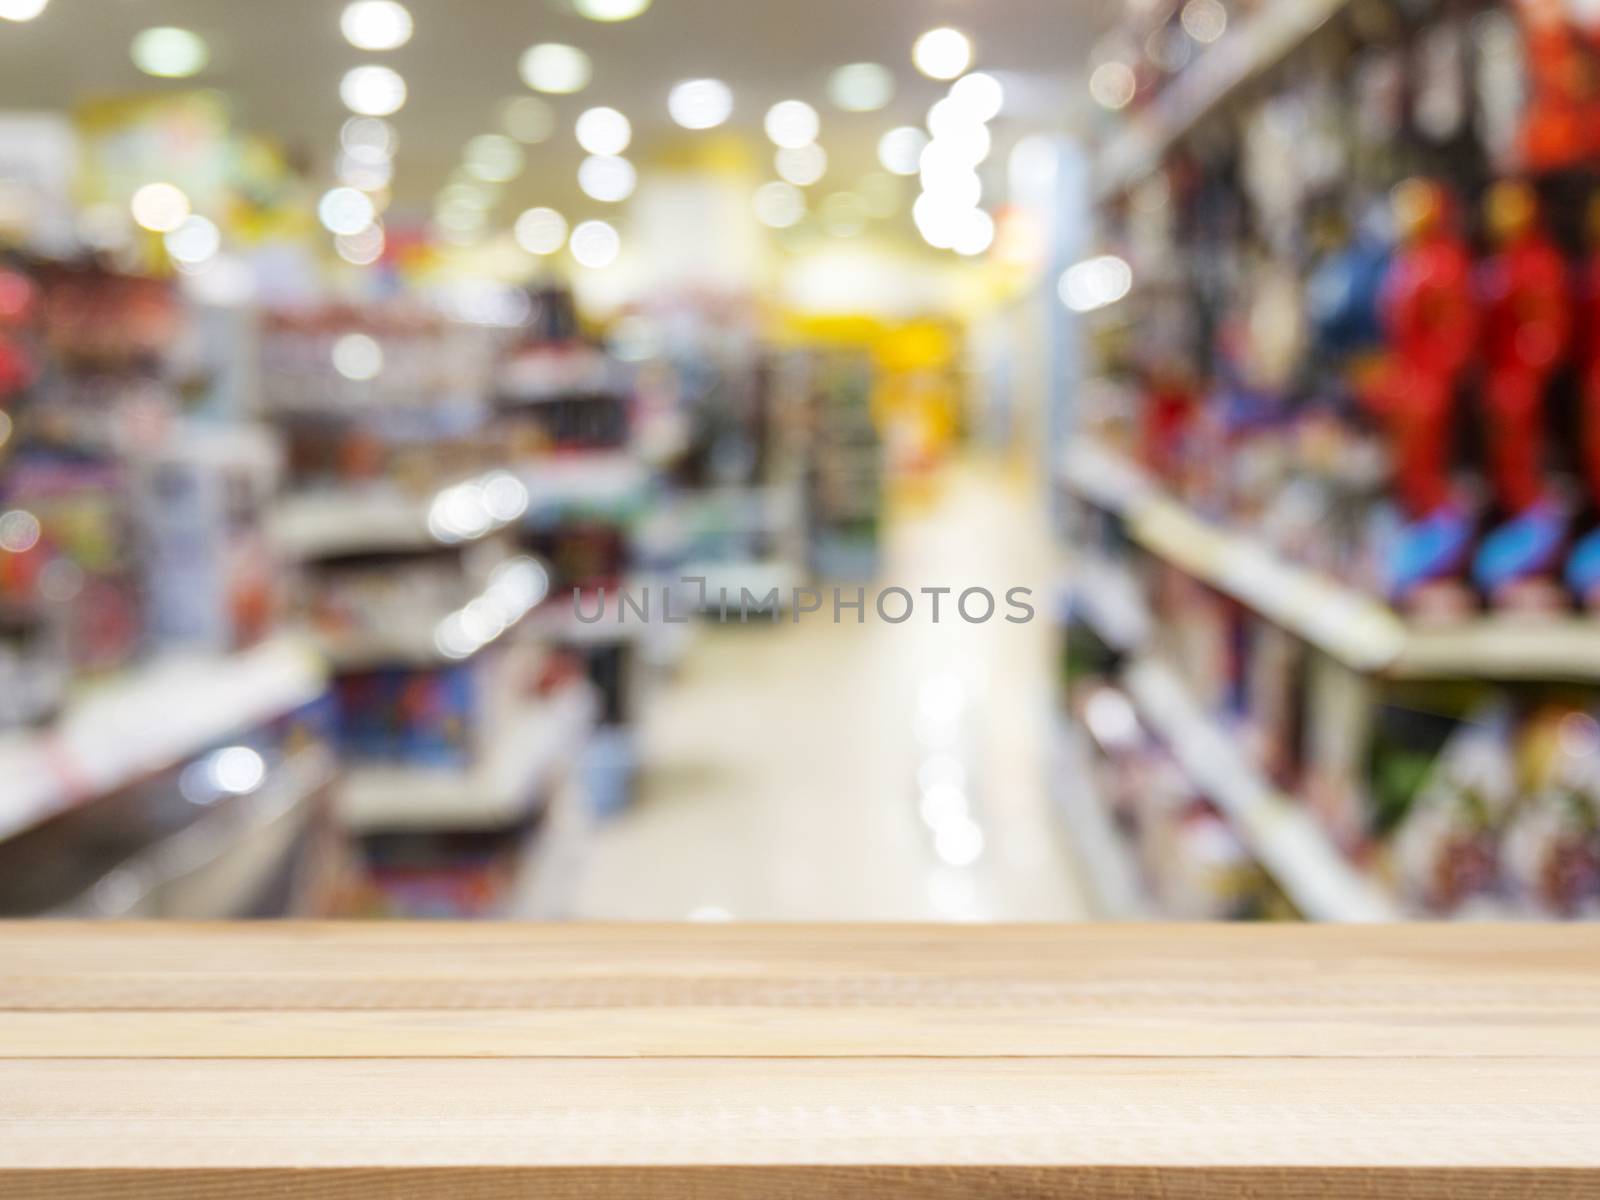 Wooden empty table in front of blurred background by fascinadora